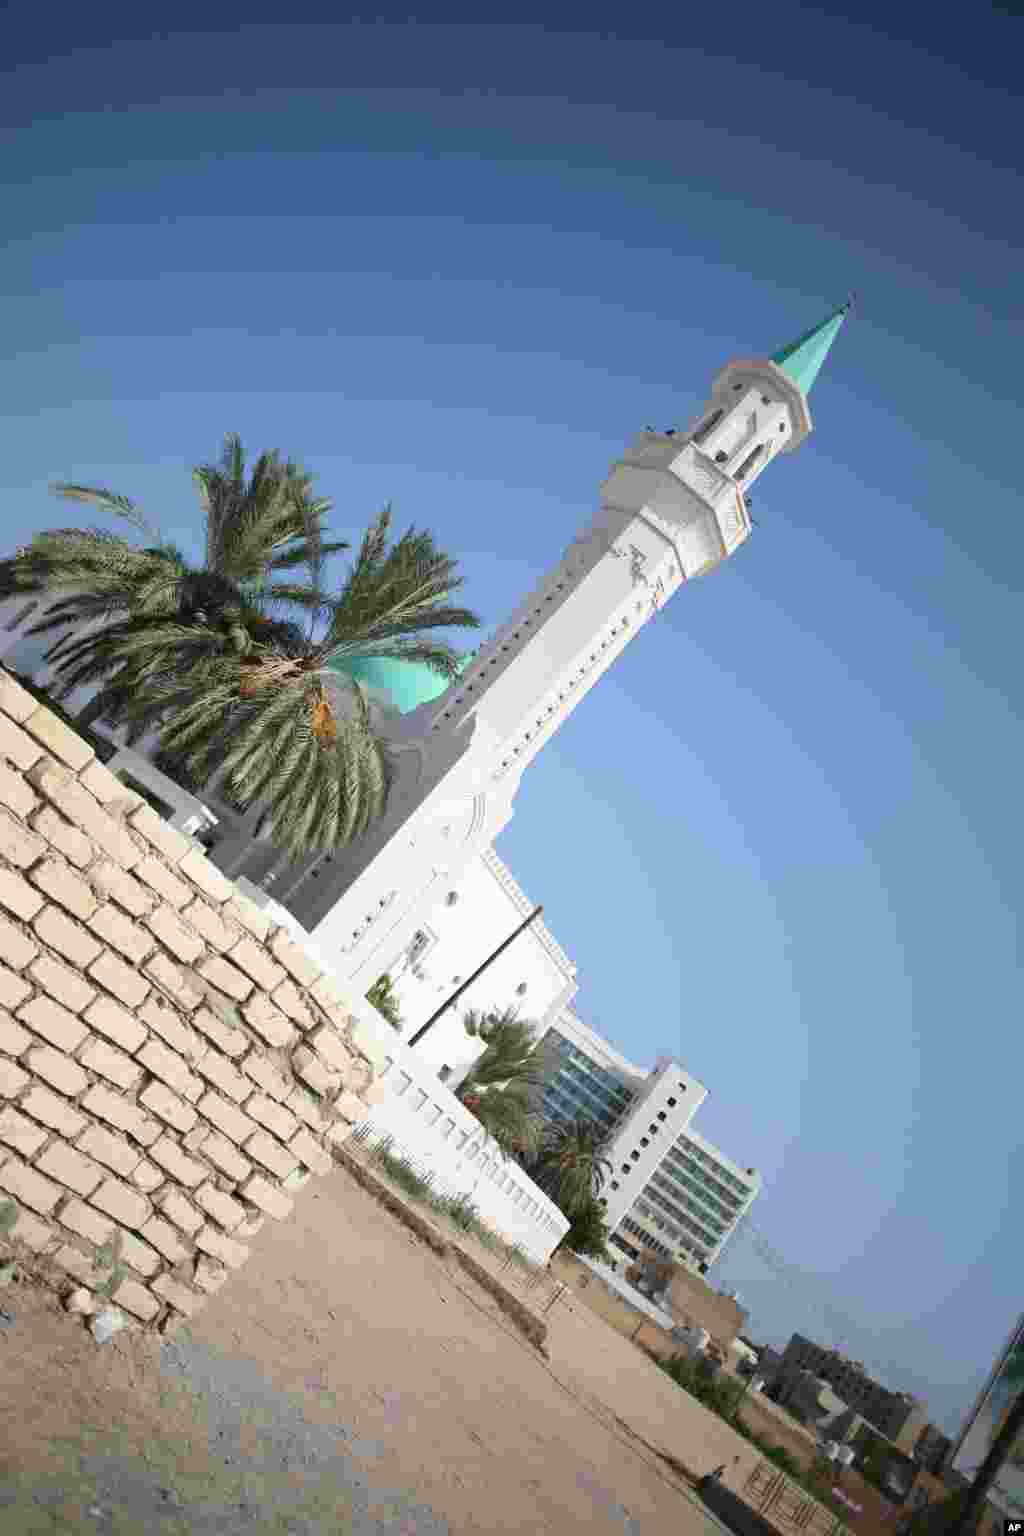 A mosque in Tripoli, August 27, 2011 (VOA - J. Weeks)